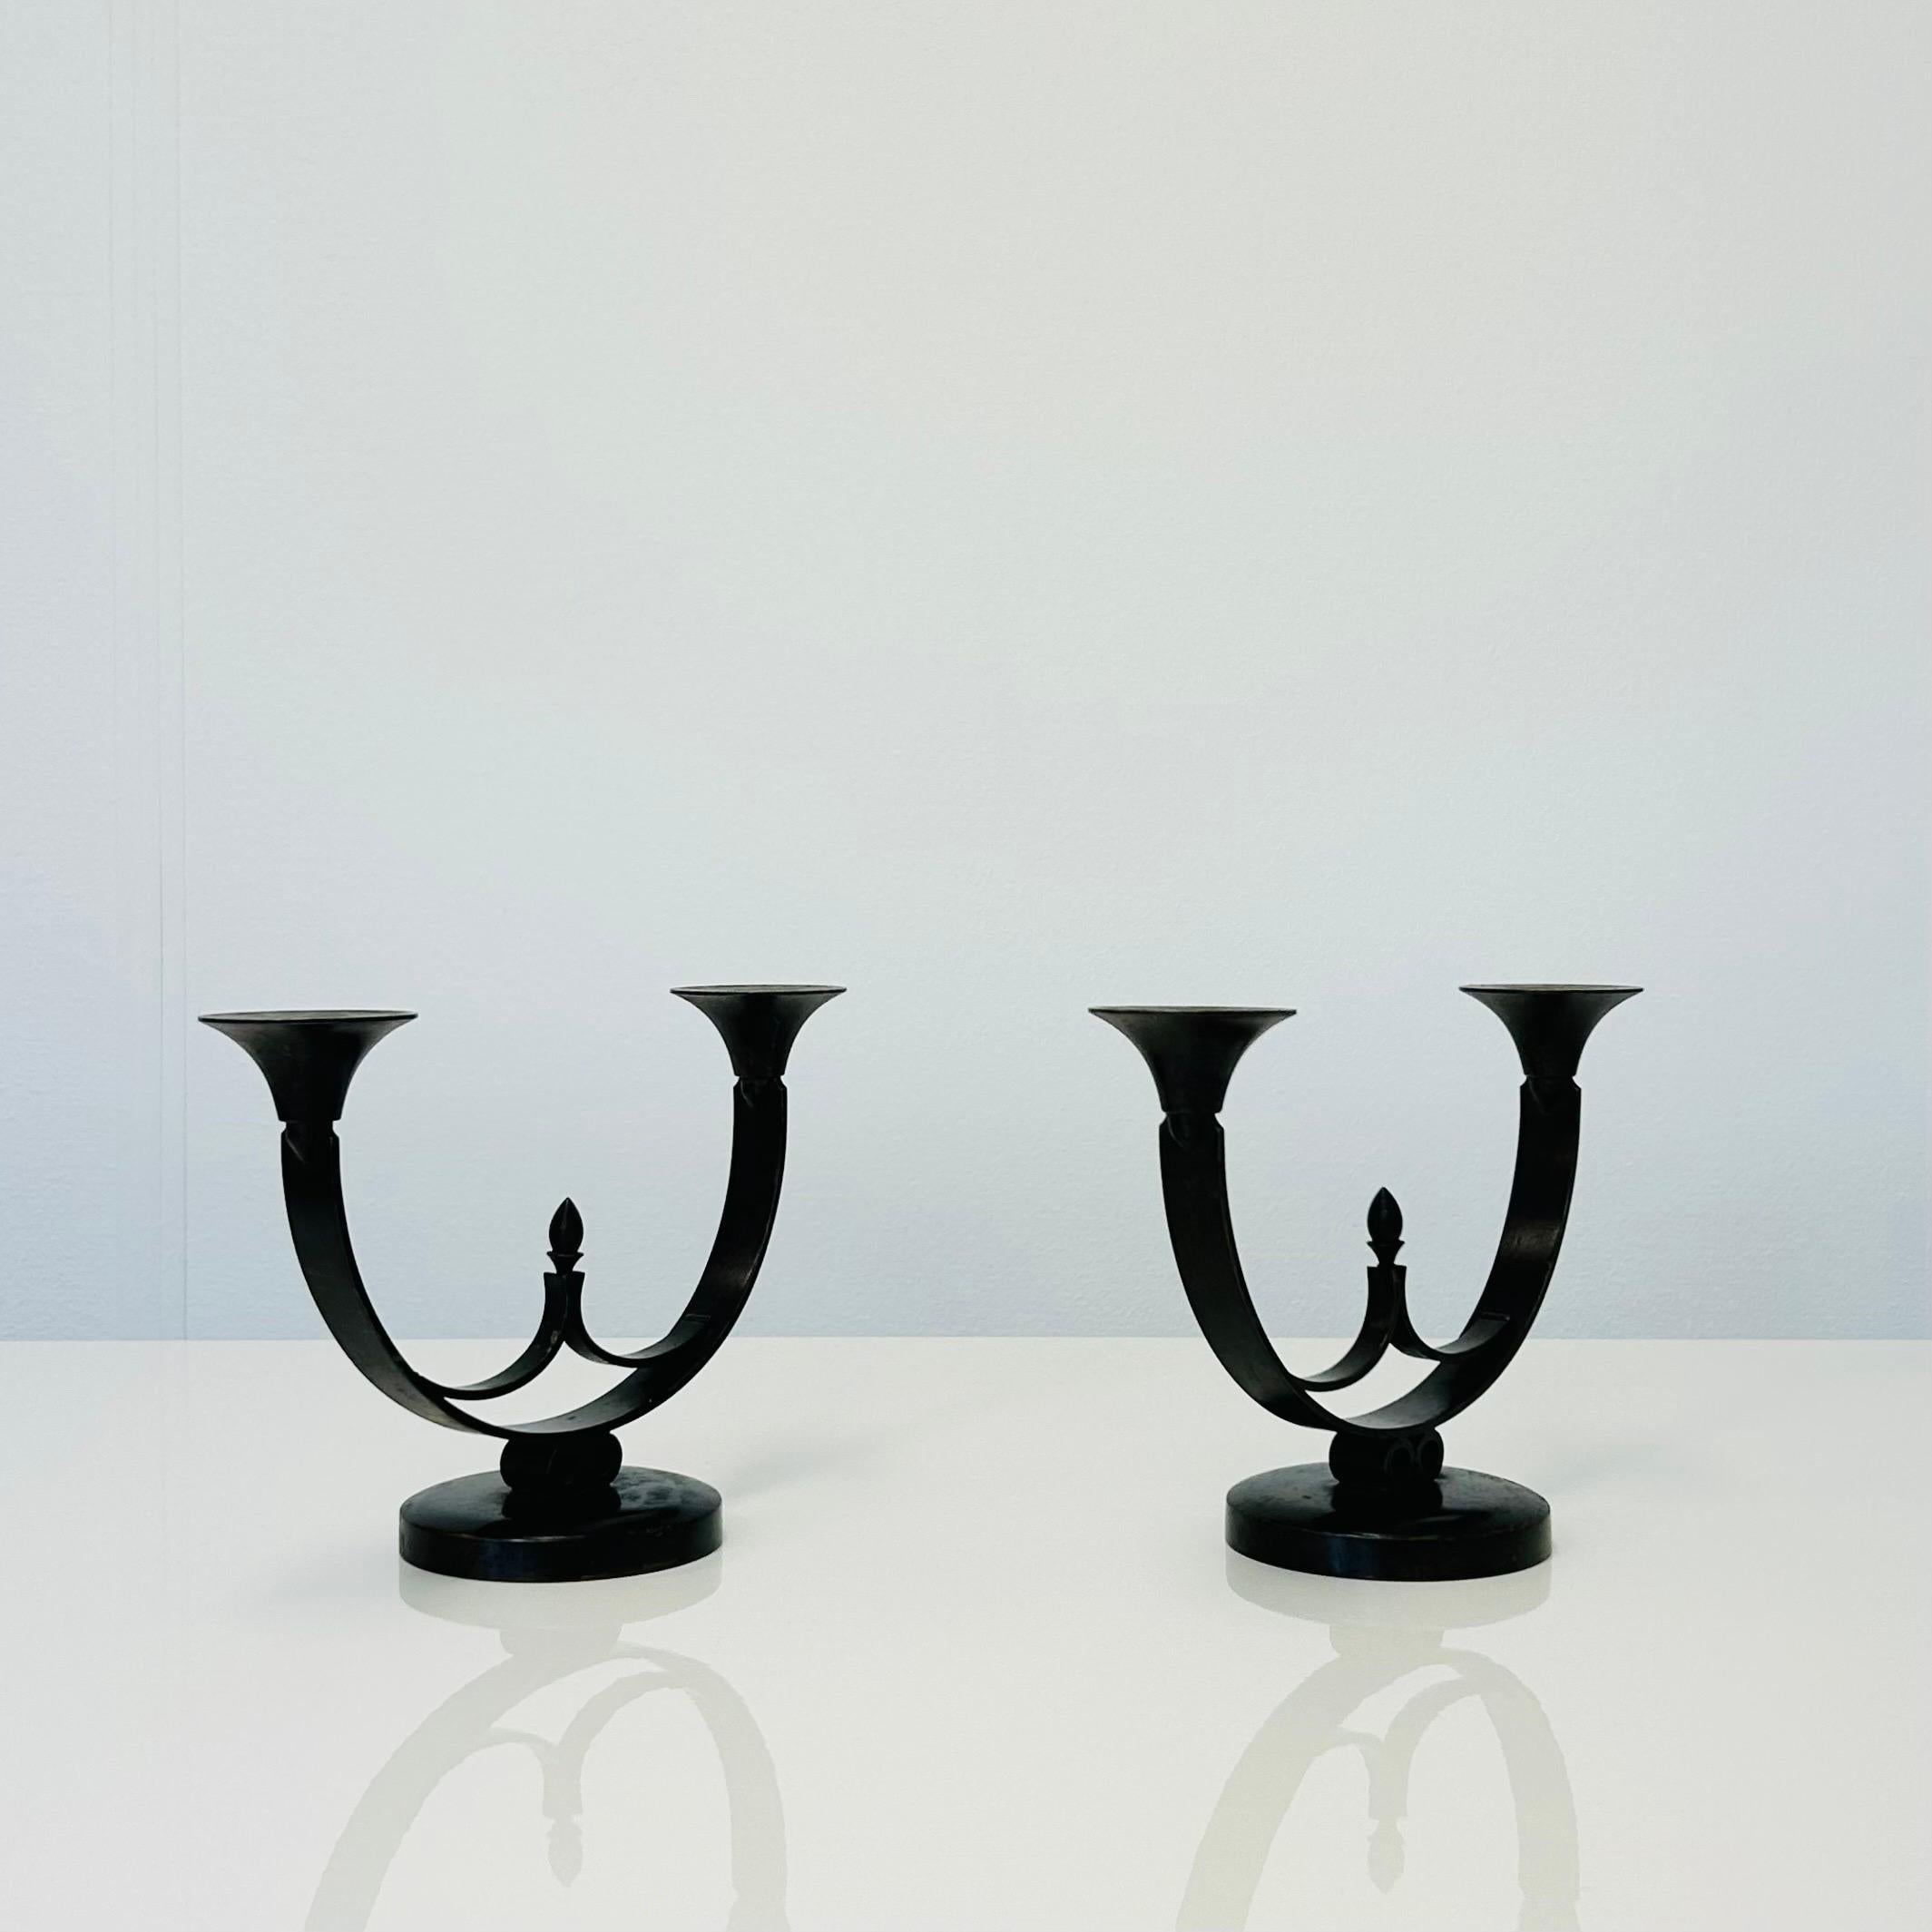 Mid-20th Century Pair of Light Bronze Candle Holders by Just Andersen, 1930s, Denmark For Sale